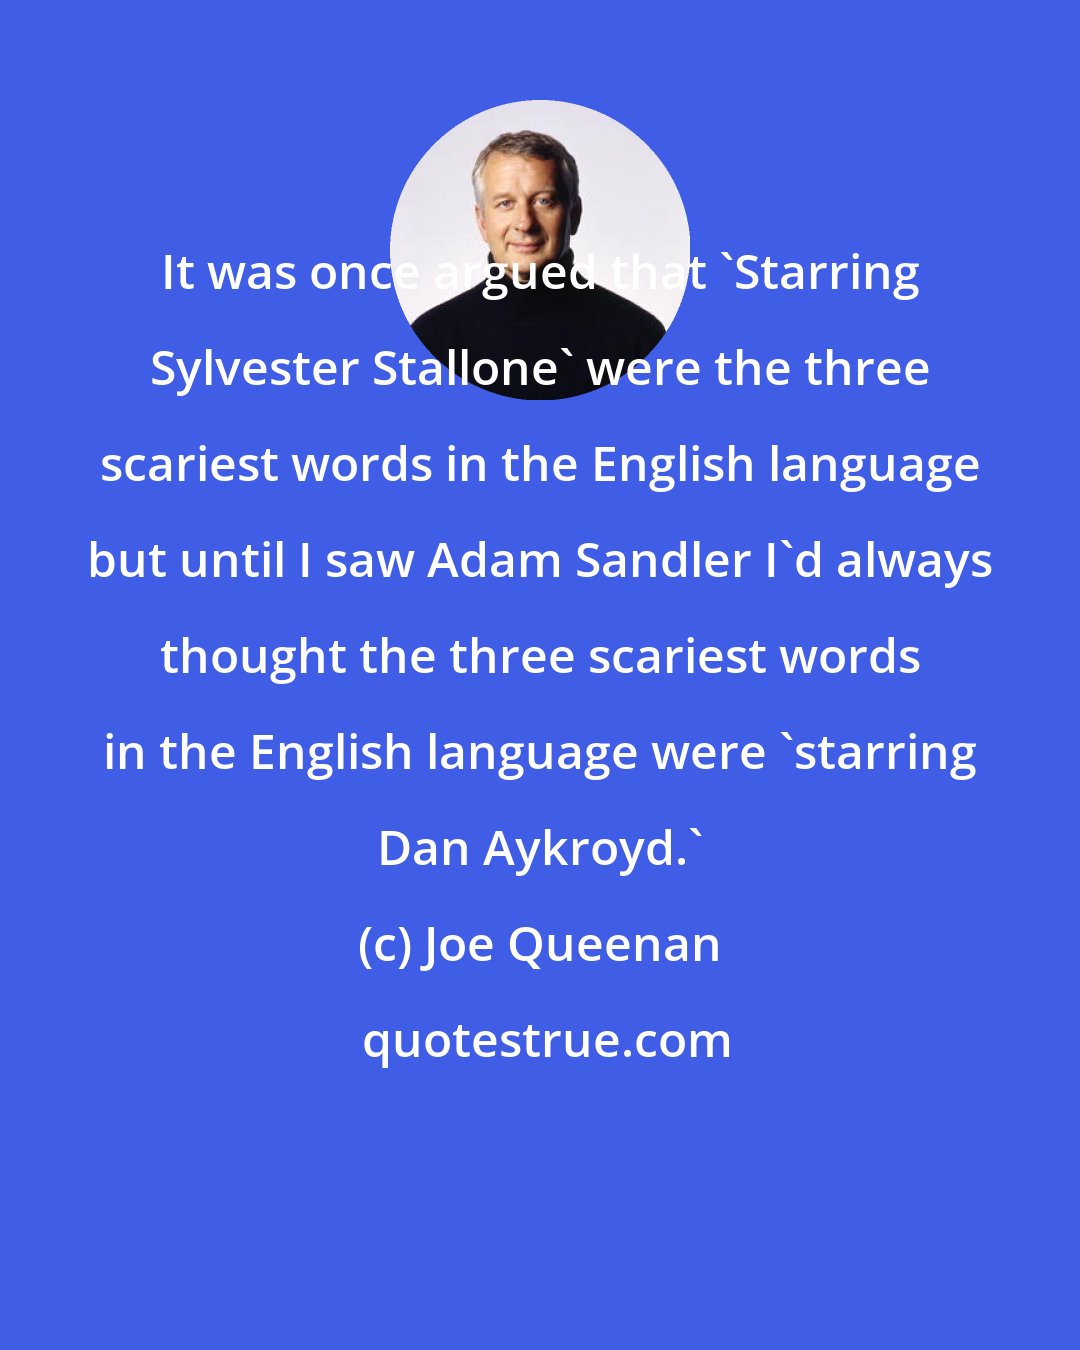 Joe Queenan: It was once argued that 'Starring Sylvester Stallone' were the three scariest words in the English language but until I saw Adam Sandler I'd always thought the three scariest words in the English language were 'starring Dan Aykroyd.'